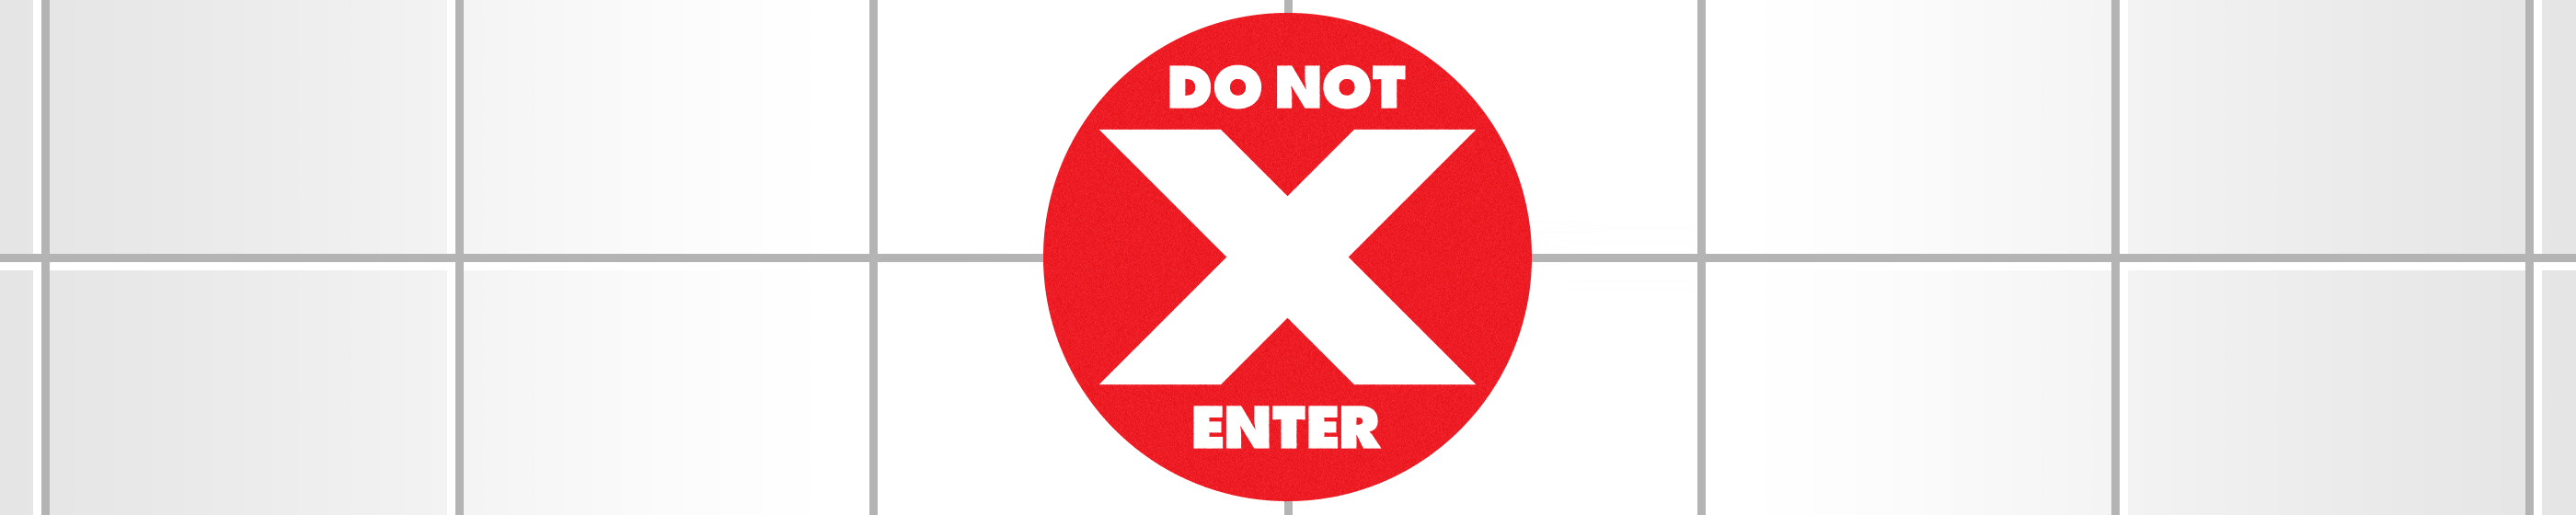 Do Not Enter Floor Decal Cover Image